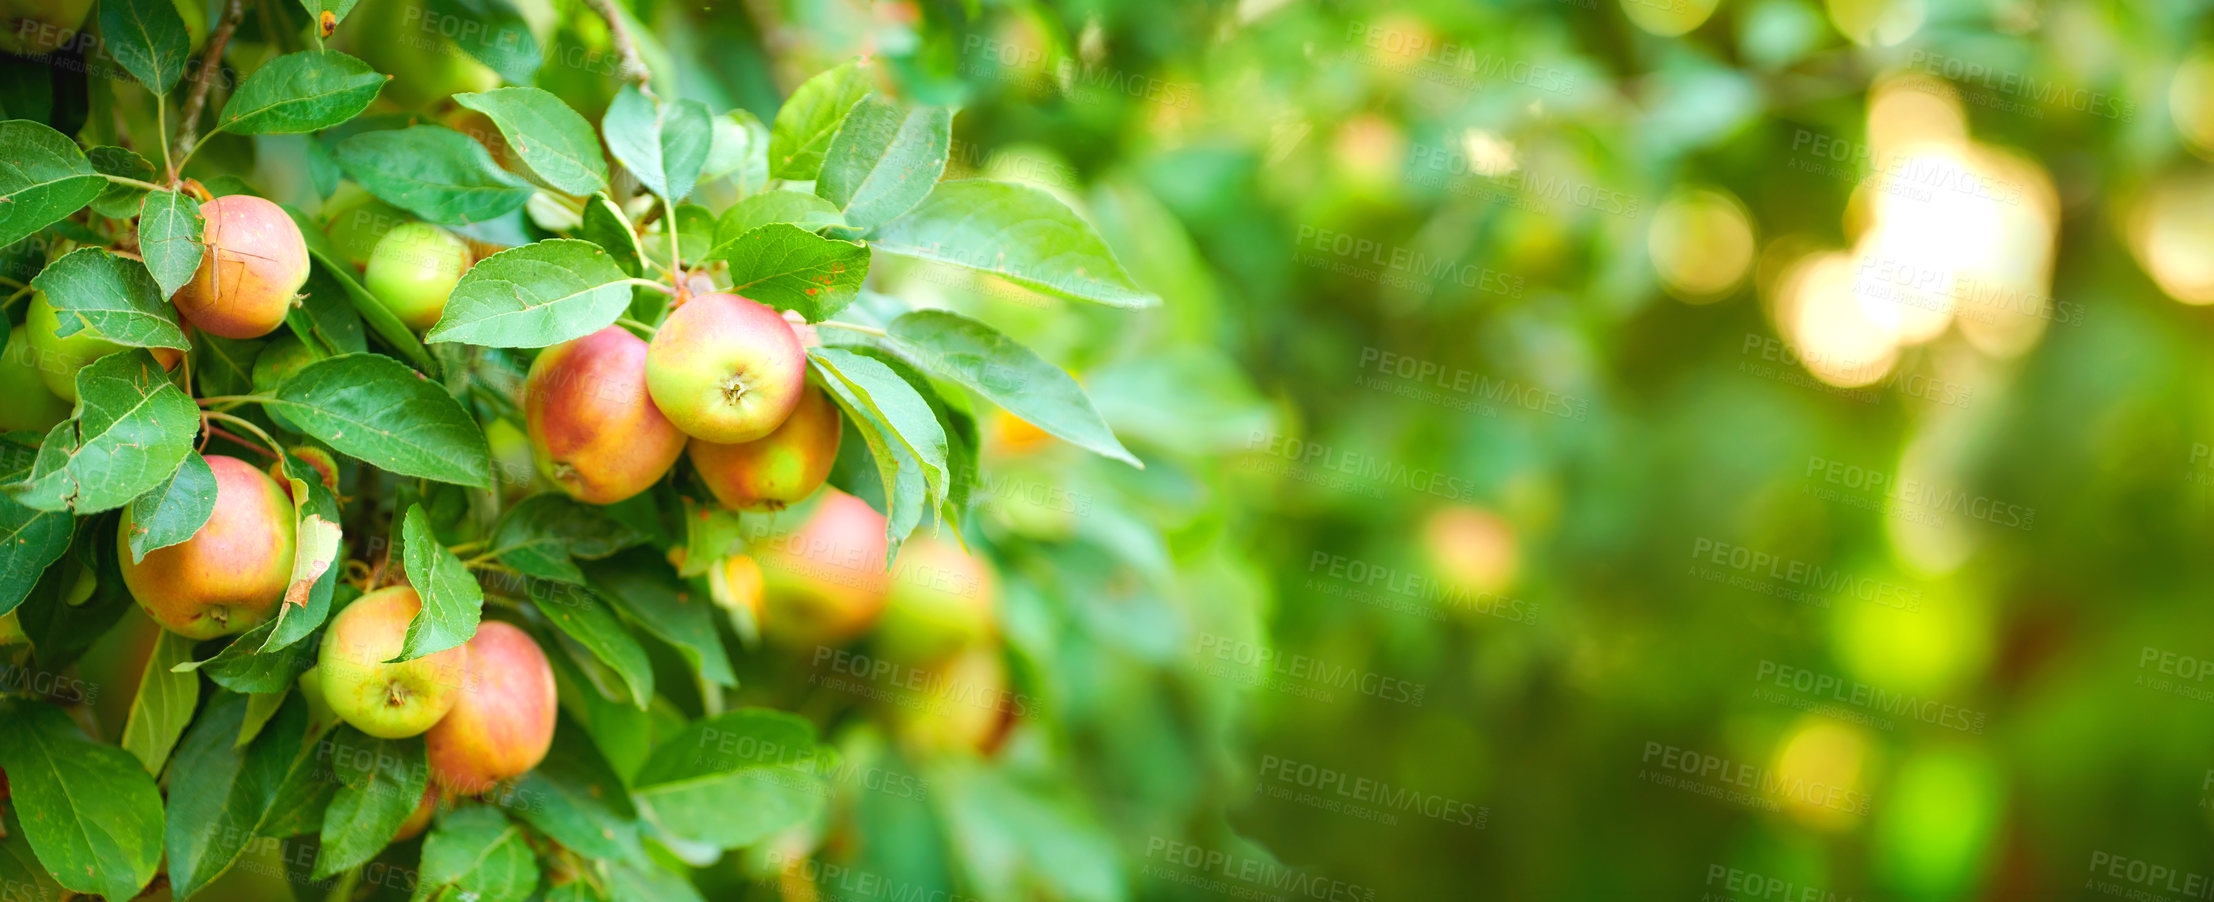 Buy stock photo Closeup of apples growing on a tree in a sustainable orchard on a sunny day outdoors. Juicy, nutritious, and fresh organic fruit growing in a scenic green landscape. Ripe produce ready for harvest